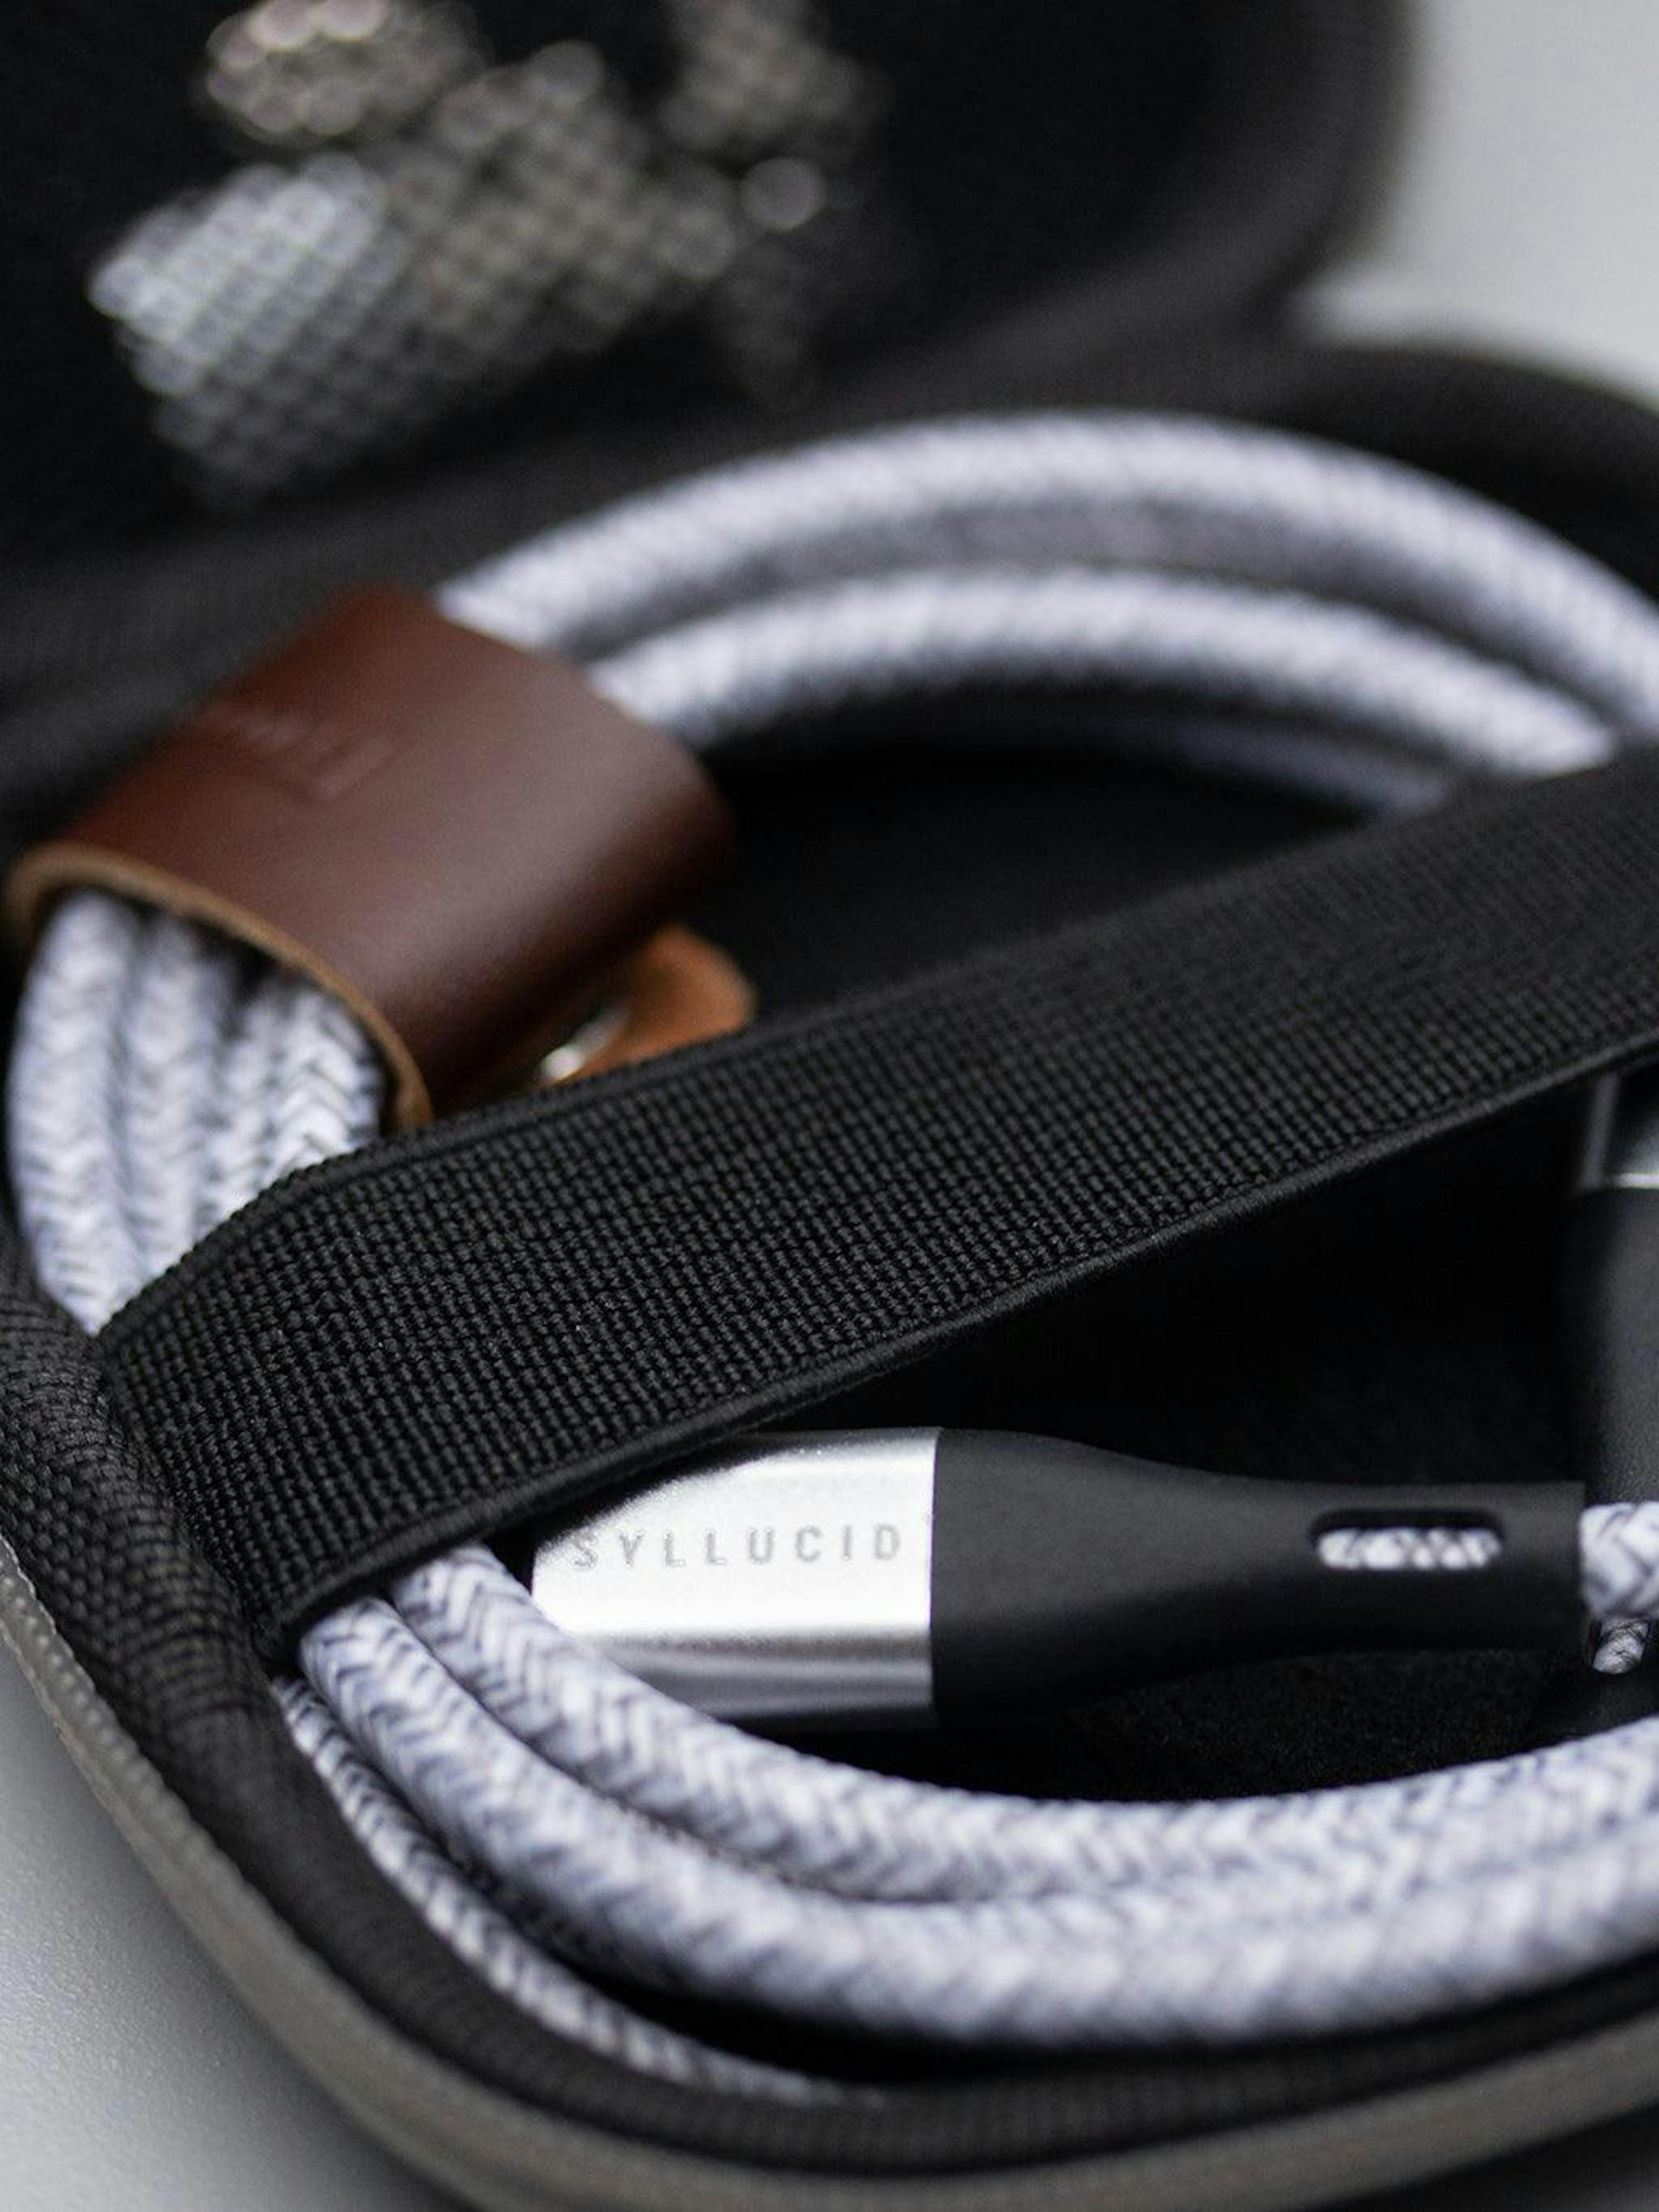 Sustainable Universal Charging Cable | All-in-one